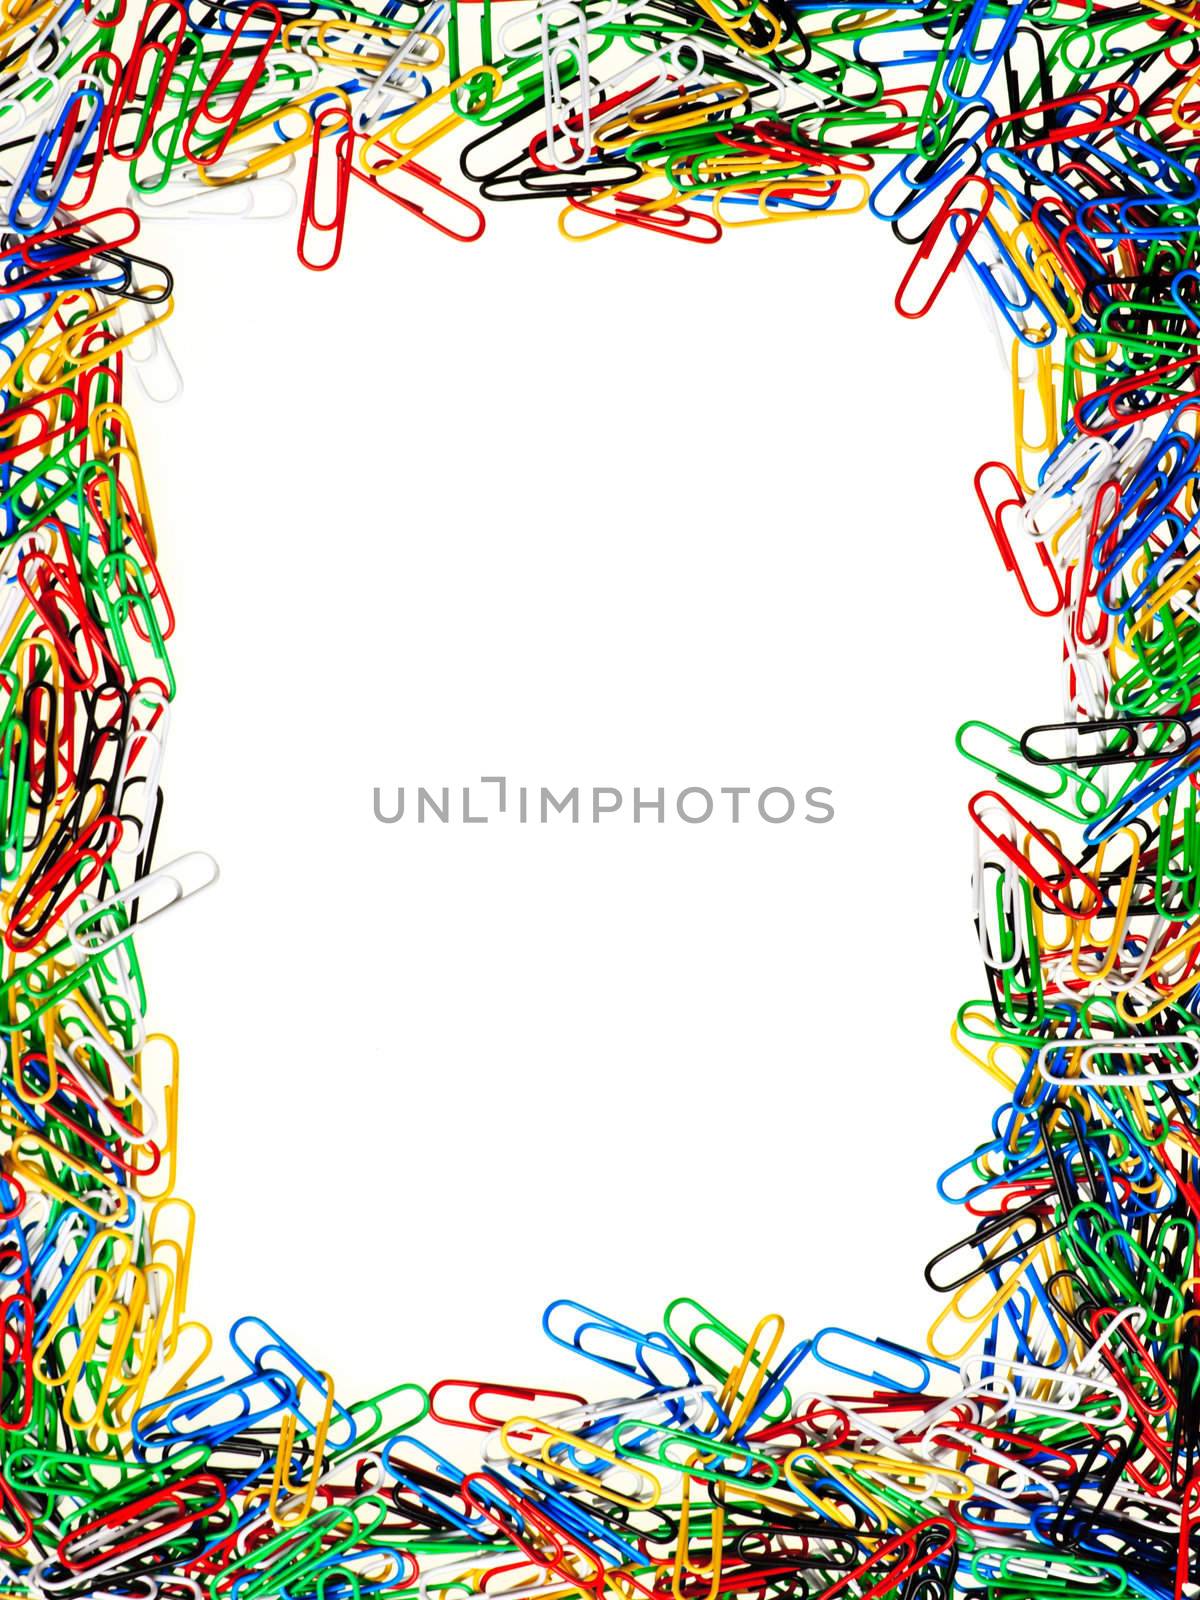 Paper clips of different colors frame